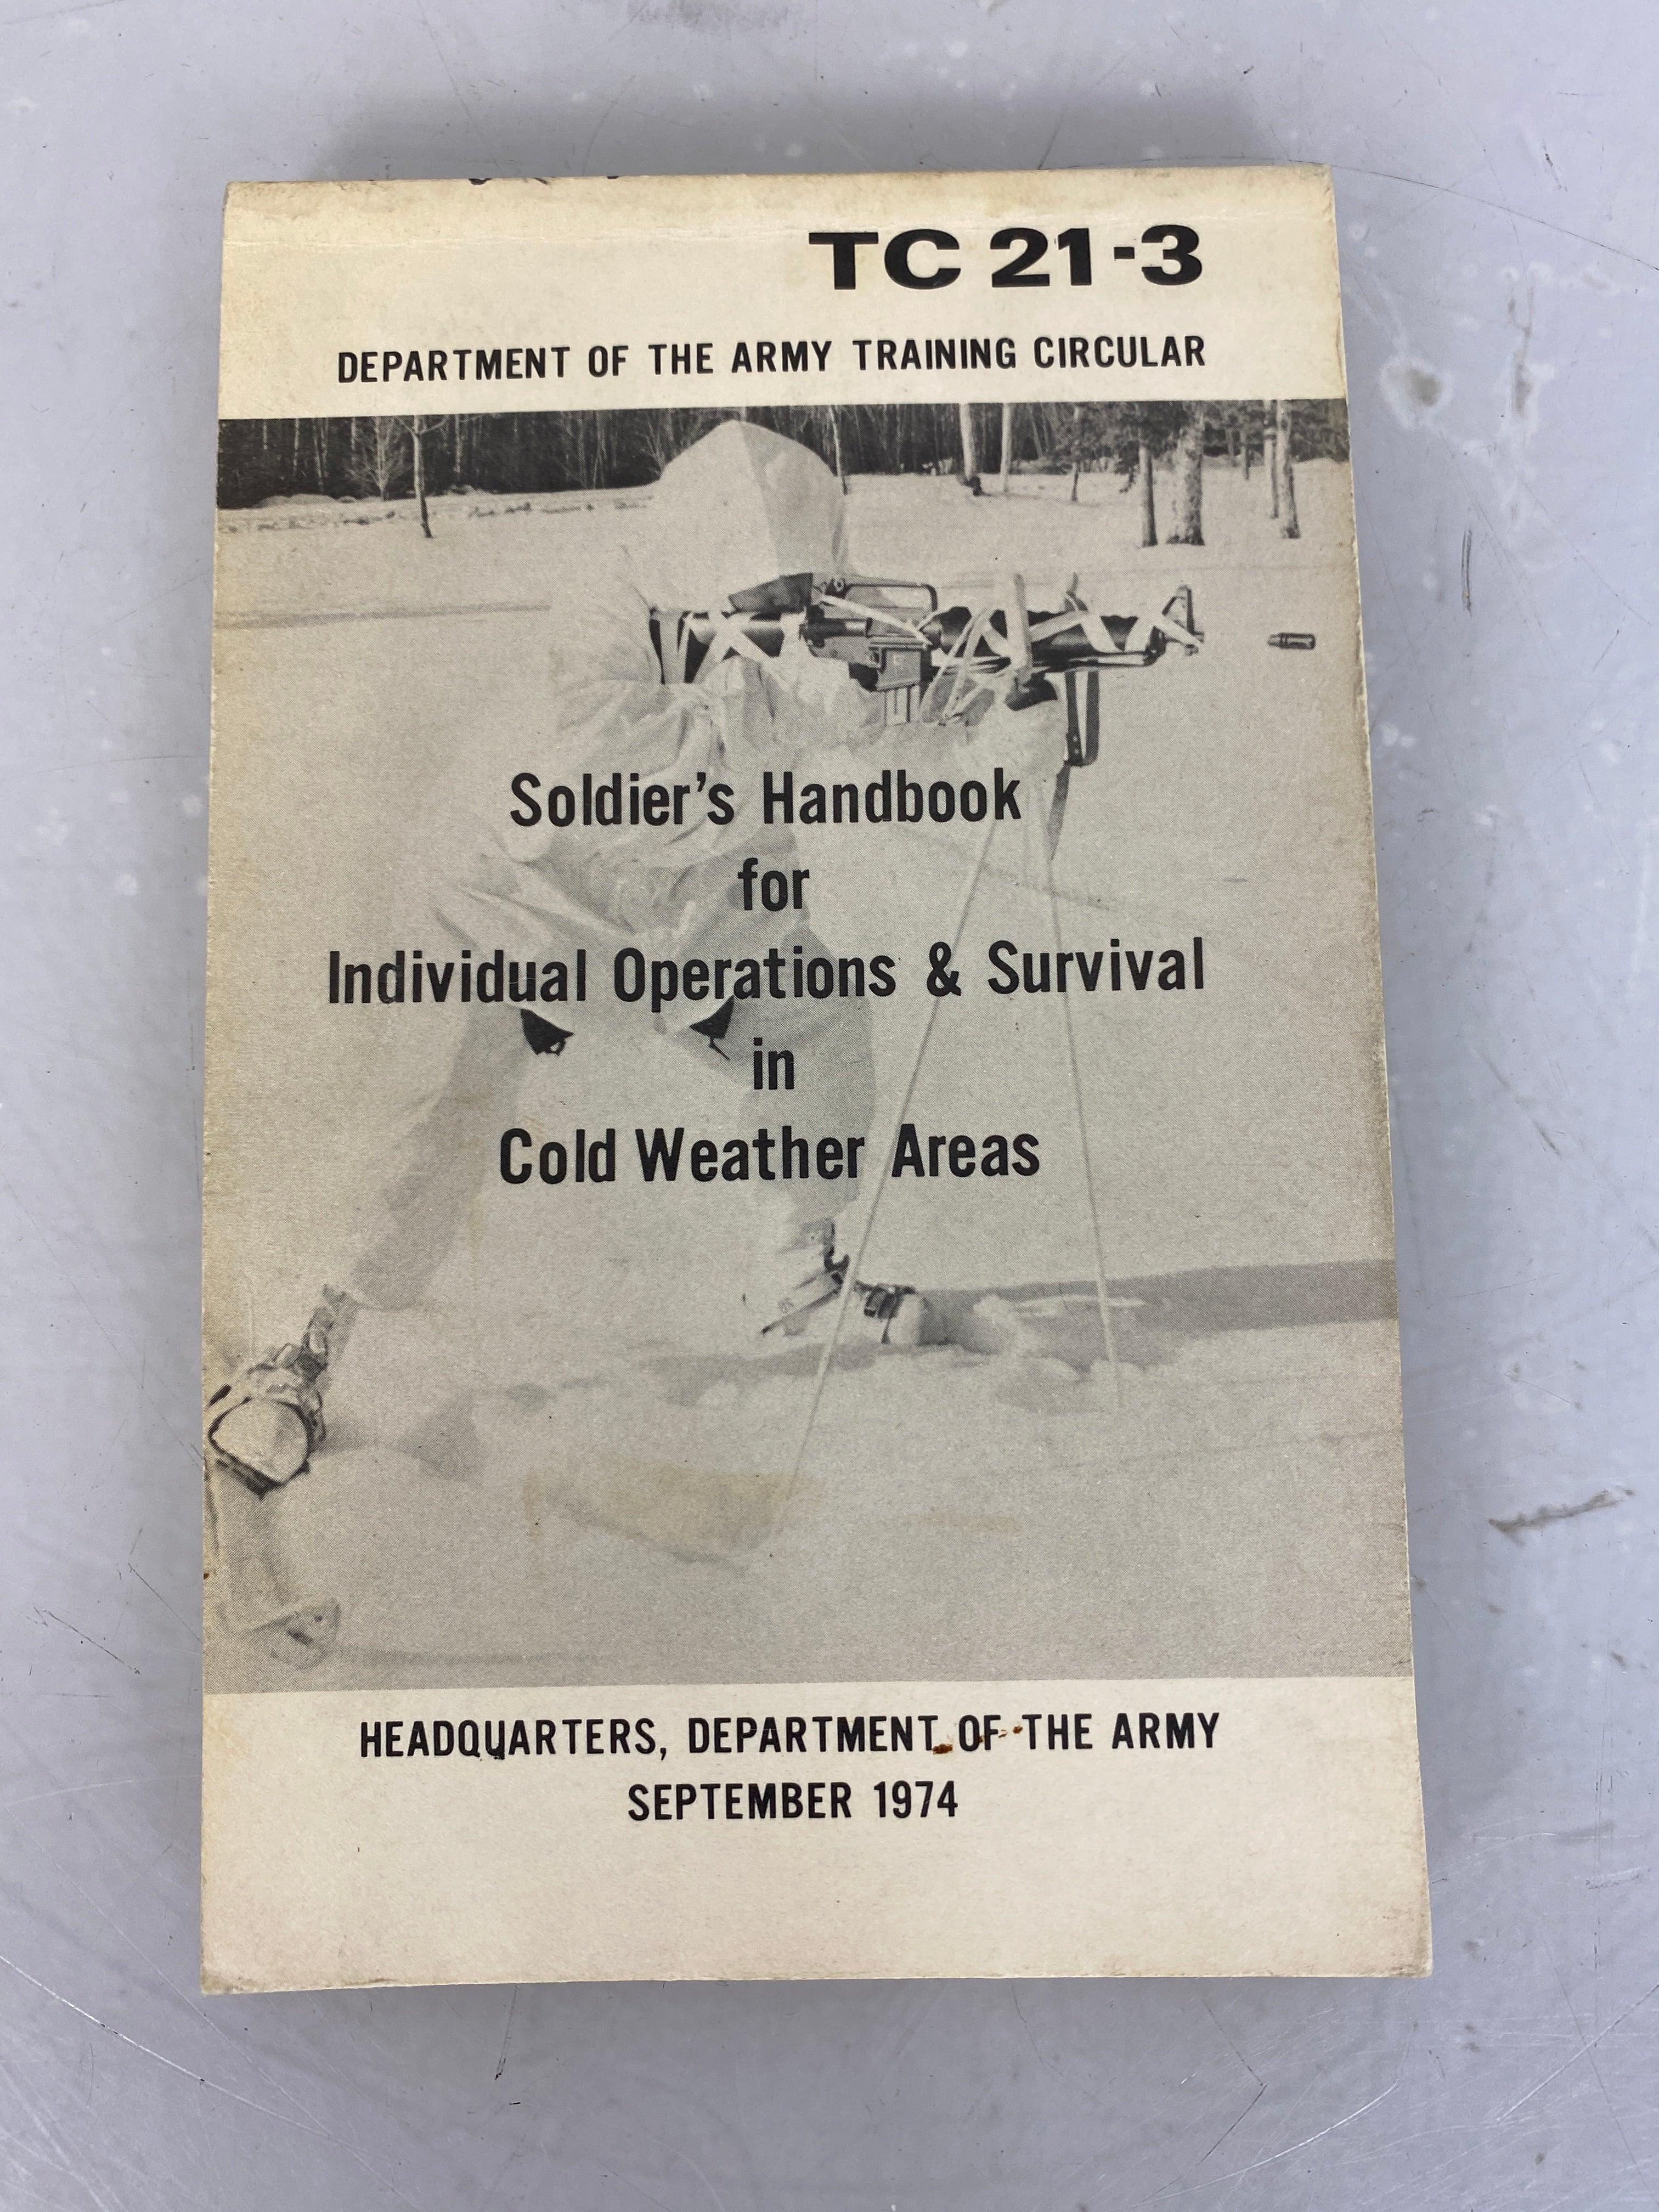 U.S. Army Soldier's Handbook for Individual Operations & Survival in Cold Weather Areas TC 21-3 1974 SC